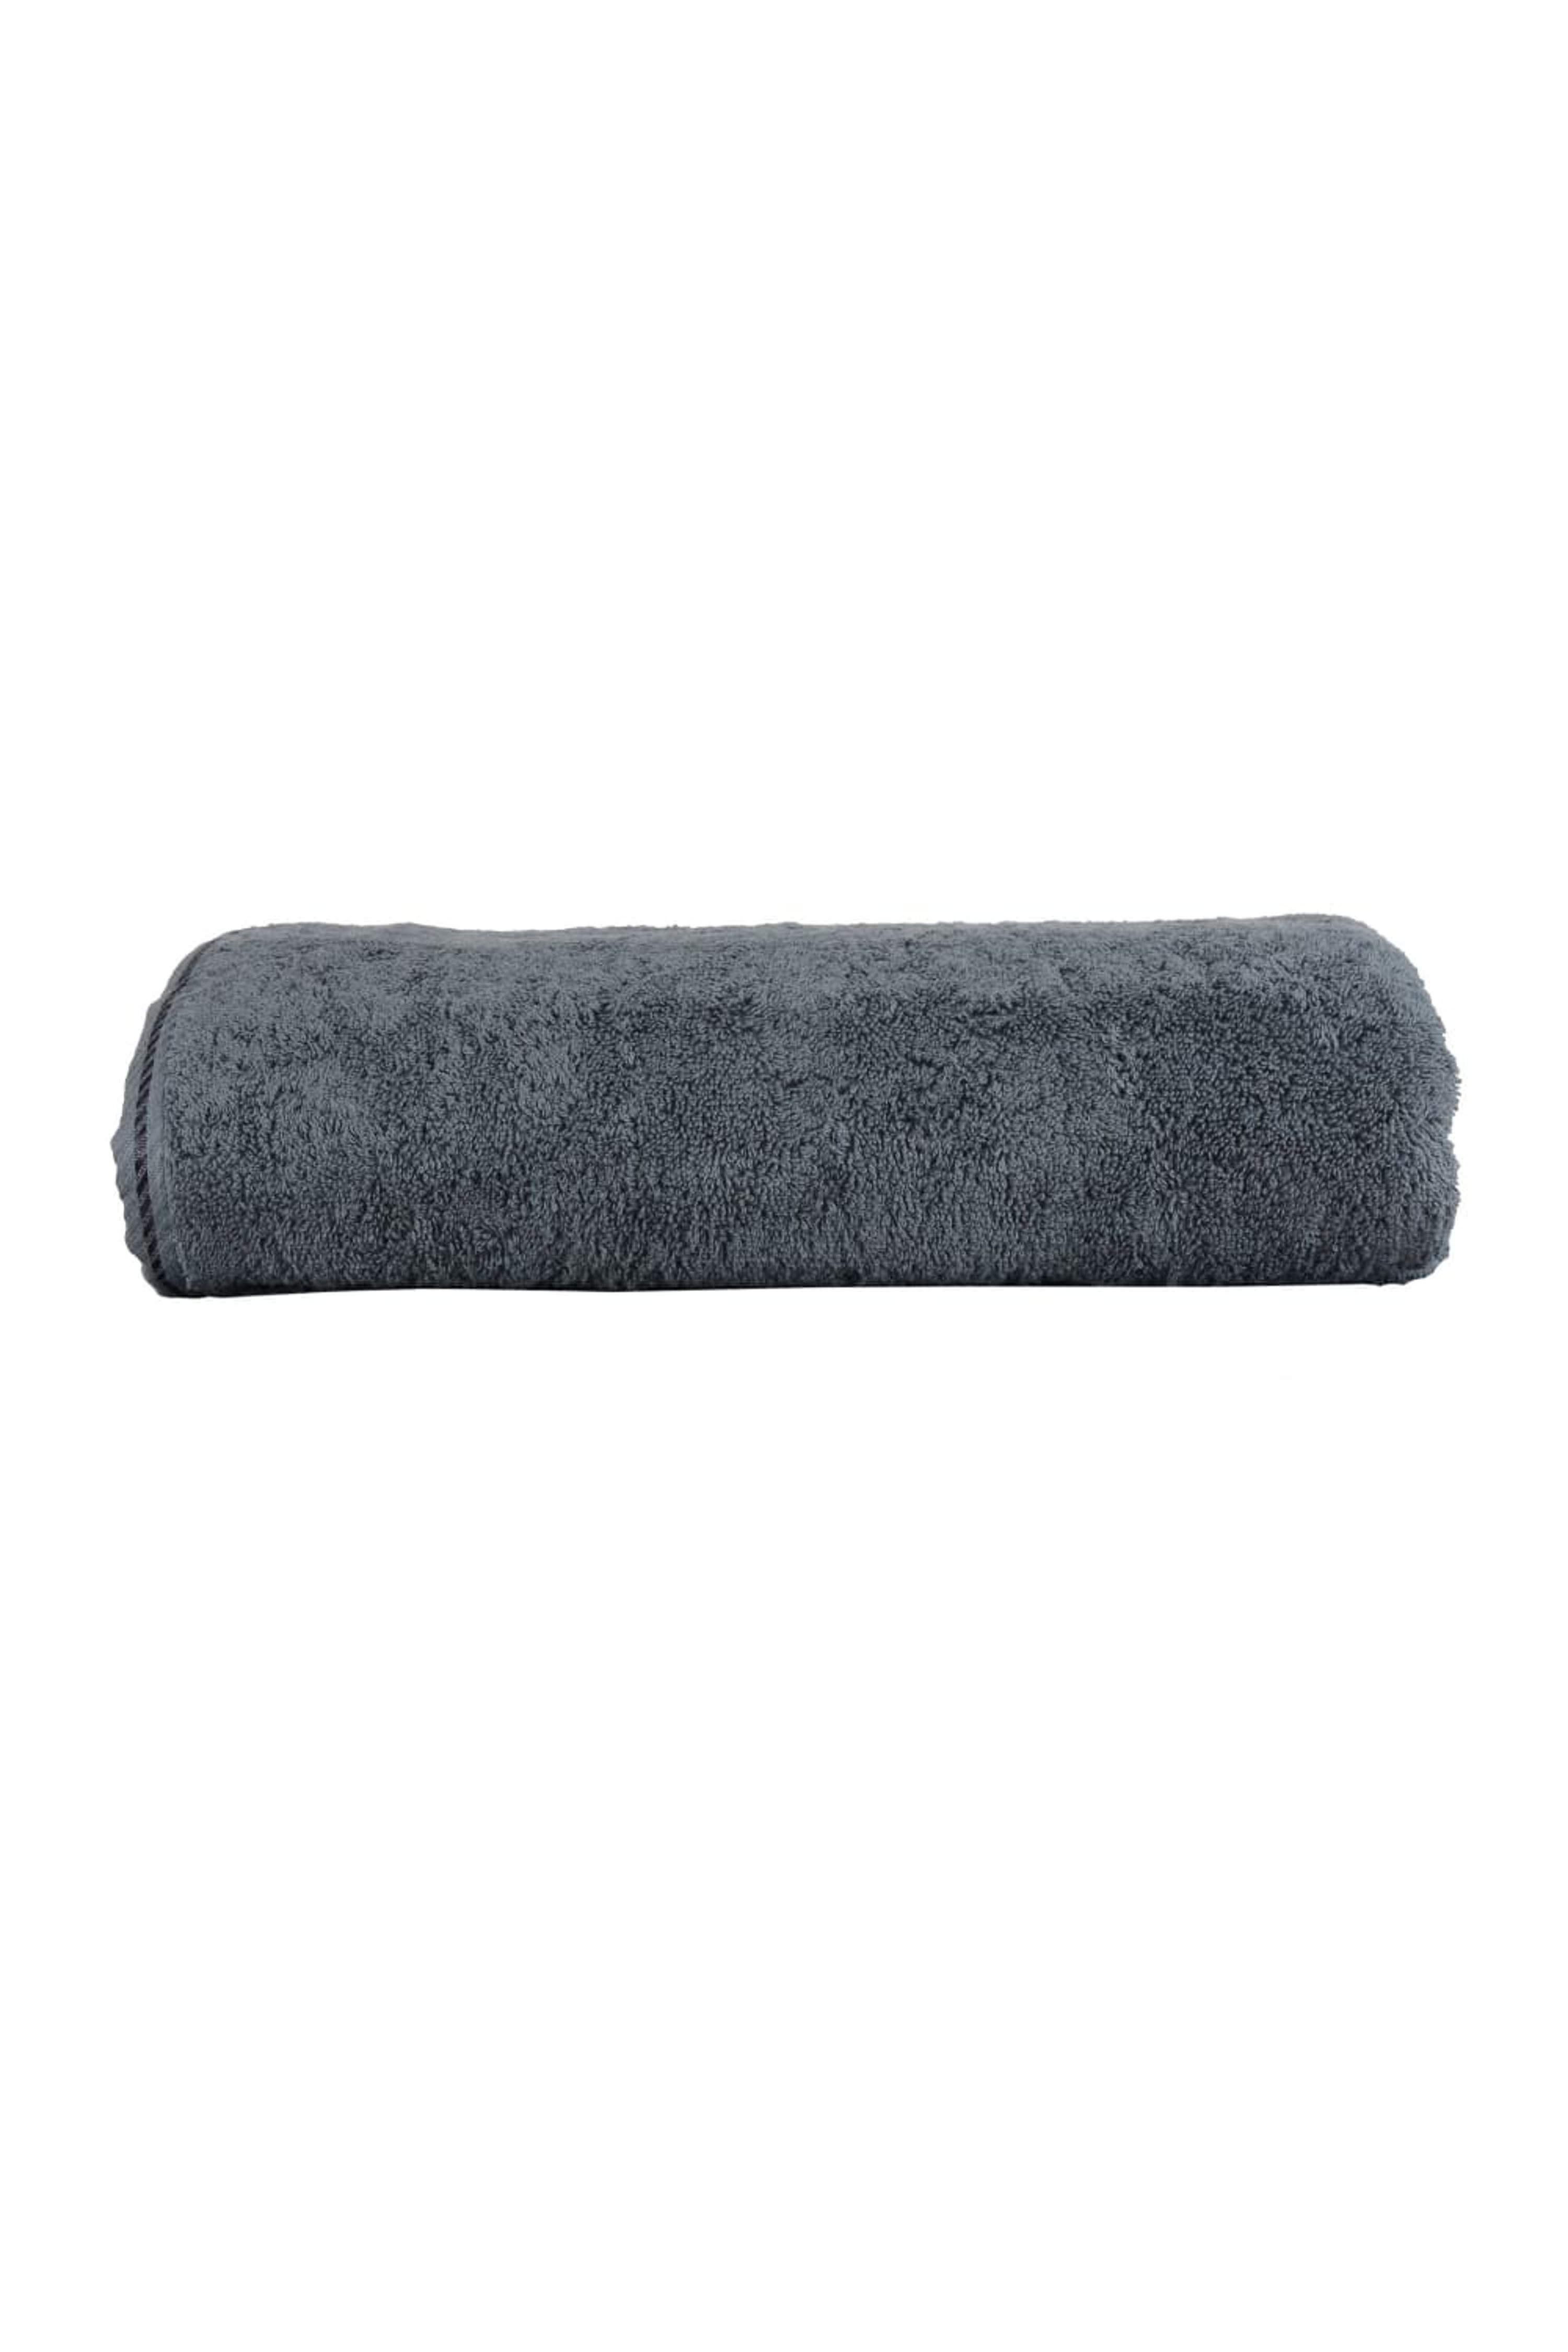 A&R TOWELS A&R TOWELS A&R TOWELS ULTRA SOFT BIG TOWEL (GRAPHITE) (ONE SIZE)